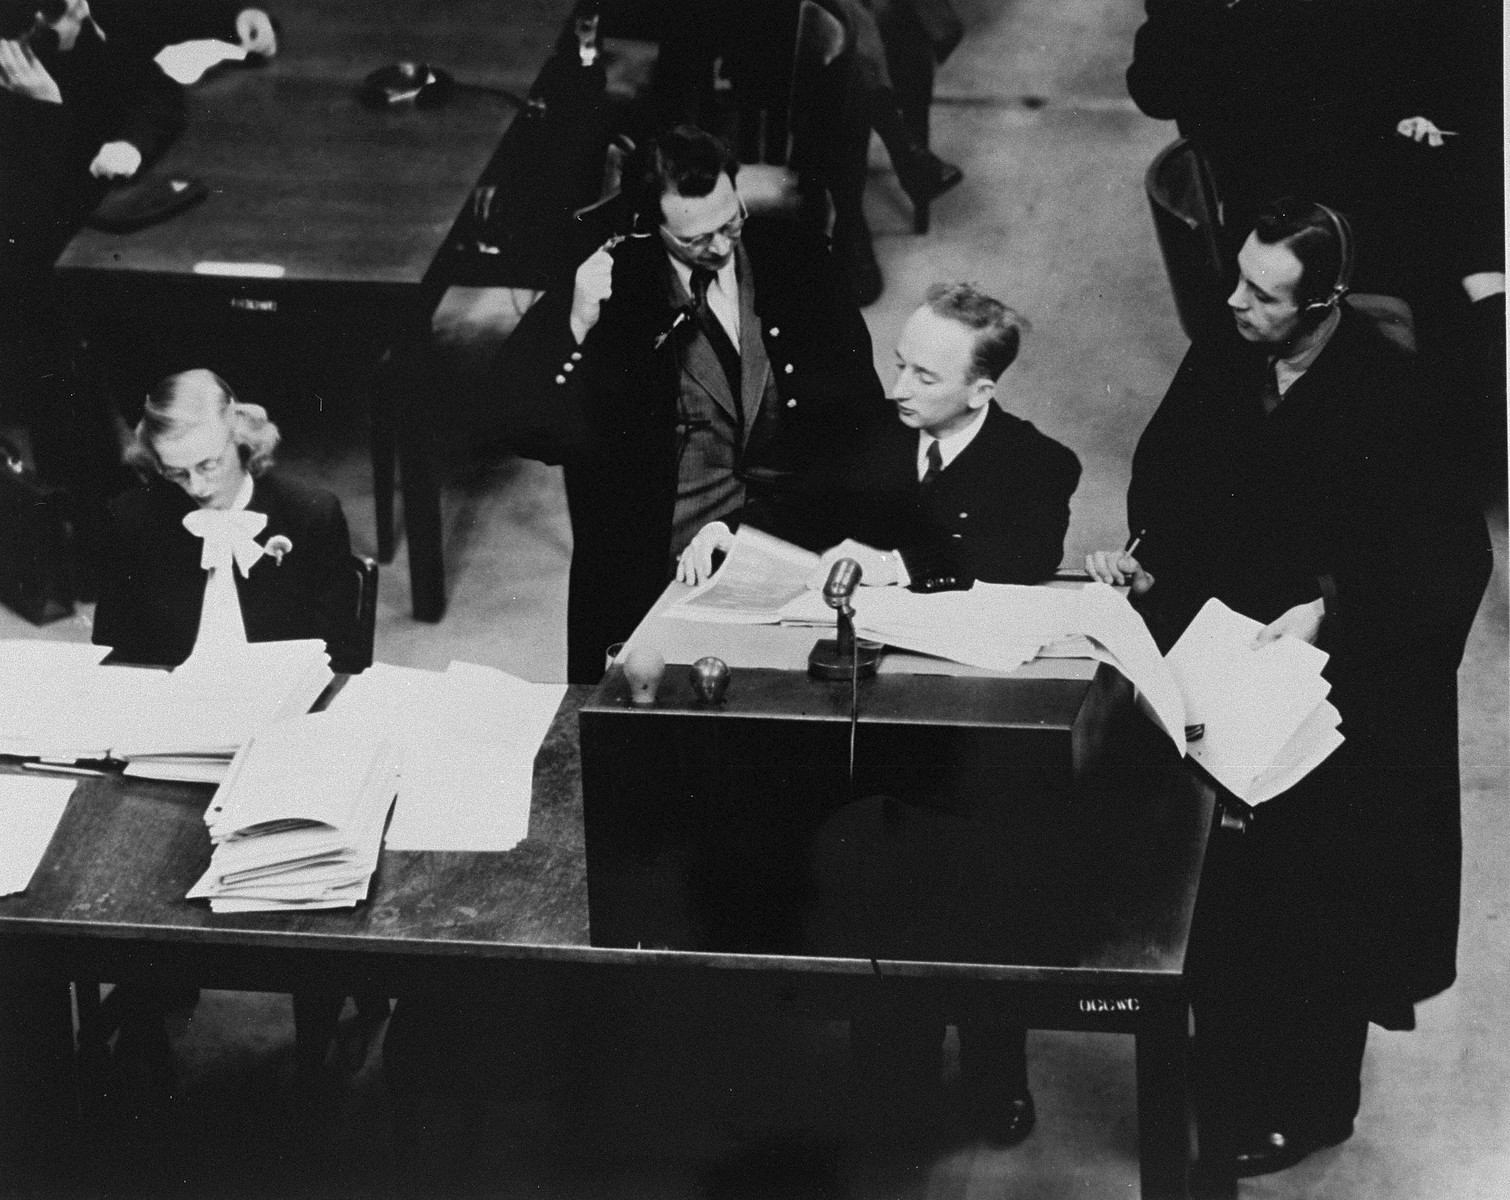 Chief prosecutor Benjamin Ferencz presents documents as evidence at the Einsatzgruppen Trial.  

Ferencz is flanked by German defense lawyers, Dr. Friedrich Bergold (right, counsel for Ernst Biberstein) and Dr. Rudolf Aschenauer (left, counsel for Otto Ohlendorf), who are protesting the introduction of the documents as evidence.